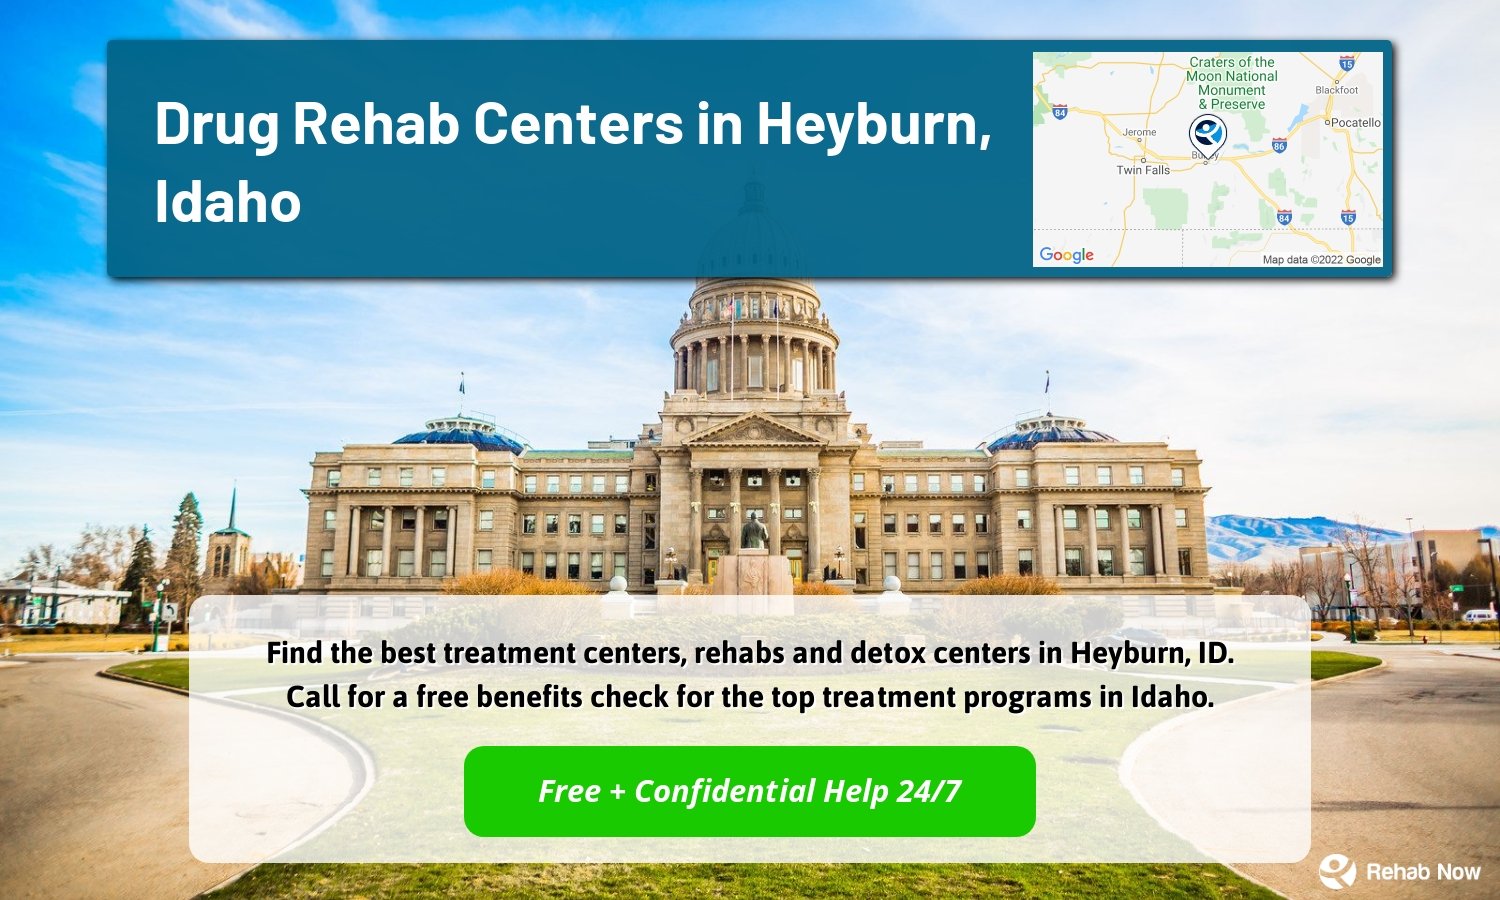 Find the best treatment centers, rehabs and detox centers in Heyburn, ID. Call for a free benefits check for the top treatment programs in Idaho.